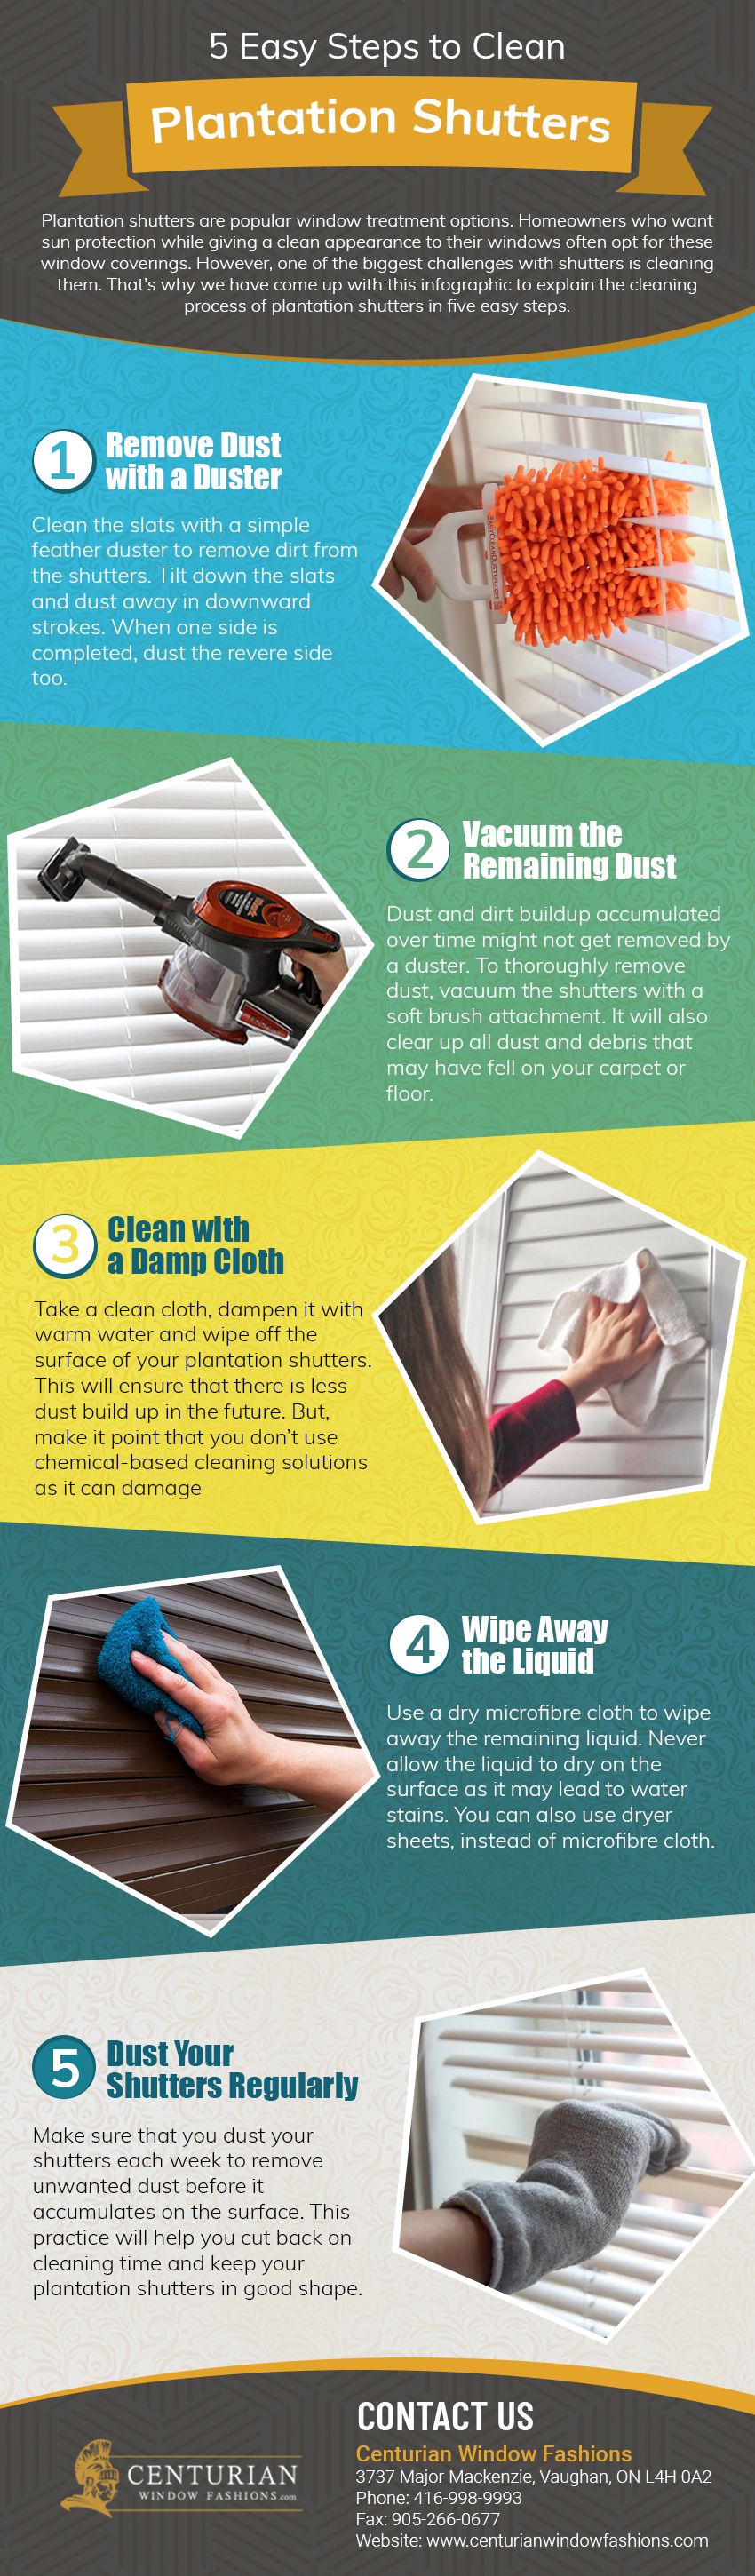 Step-by-Step Guide to Cleaning Plantation Shutters